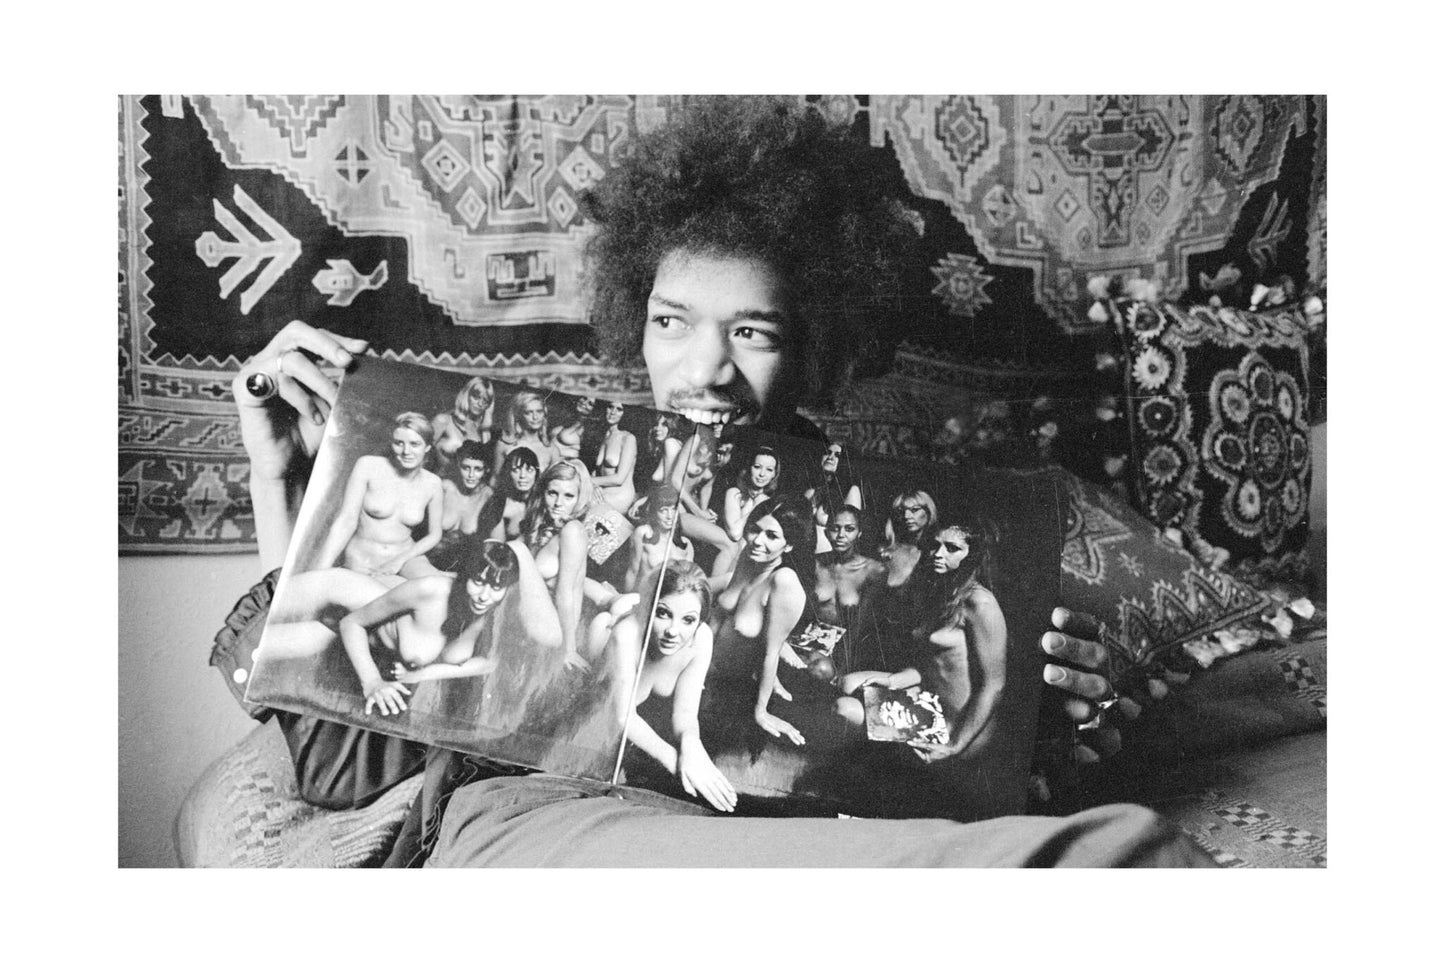 Jimi Hendrix - Biting the Electric Ladyland Cover, England, 1969 Poster